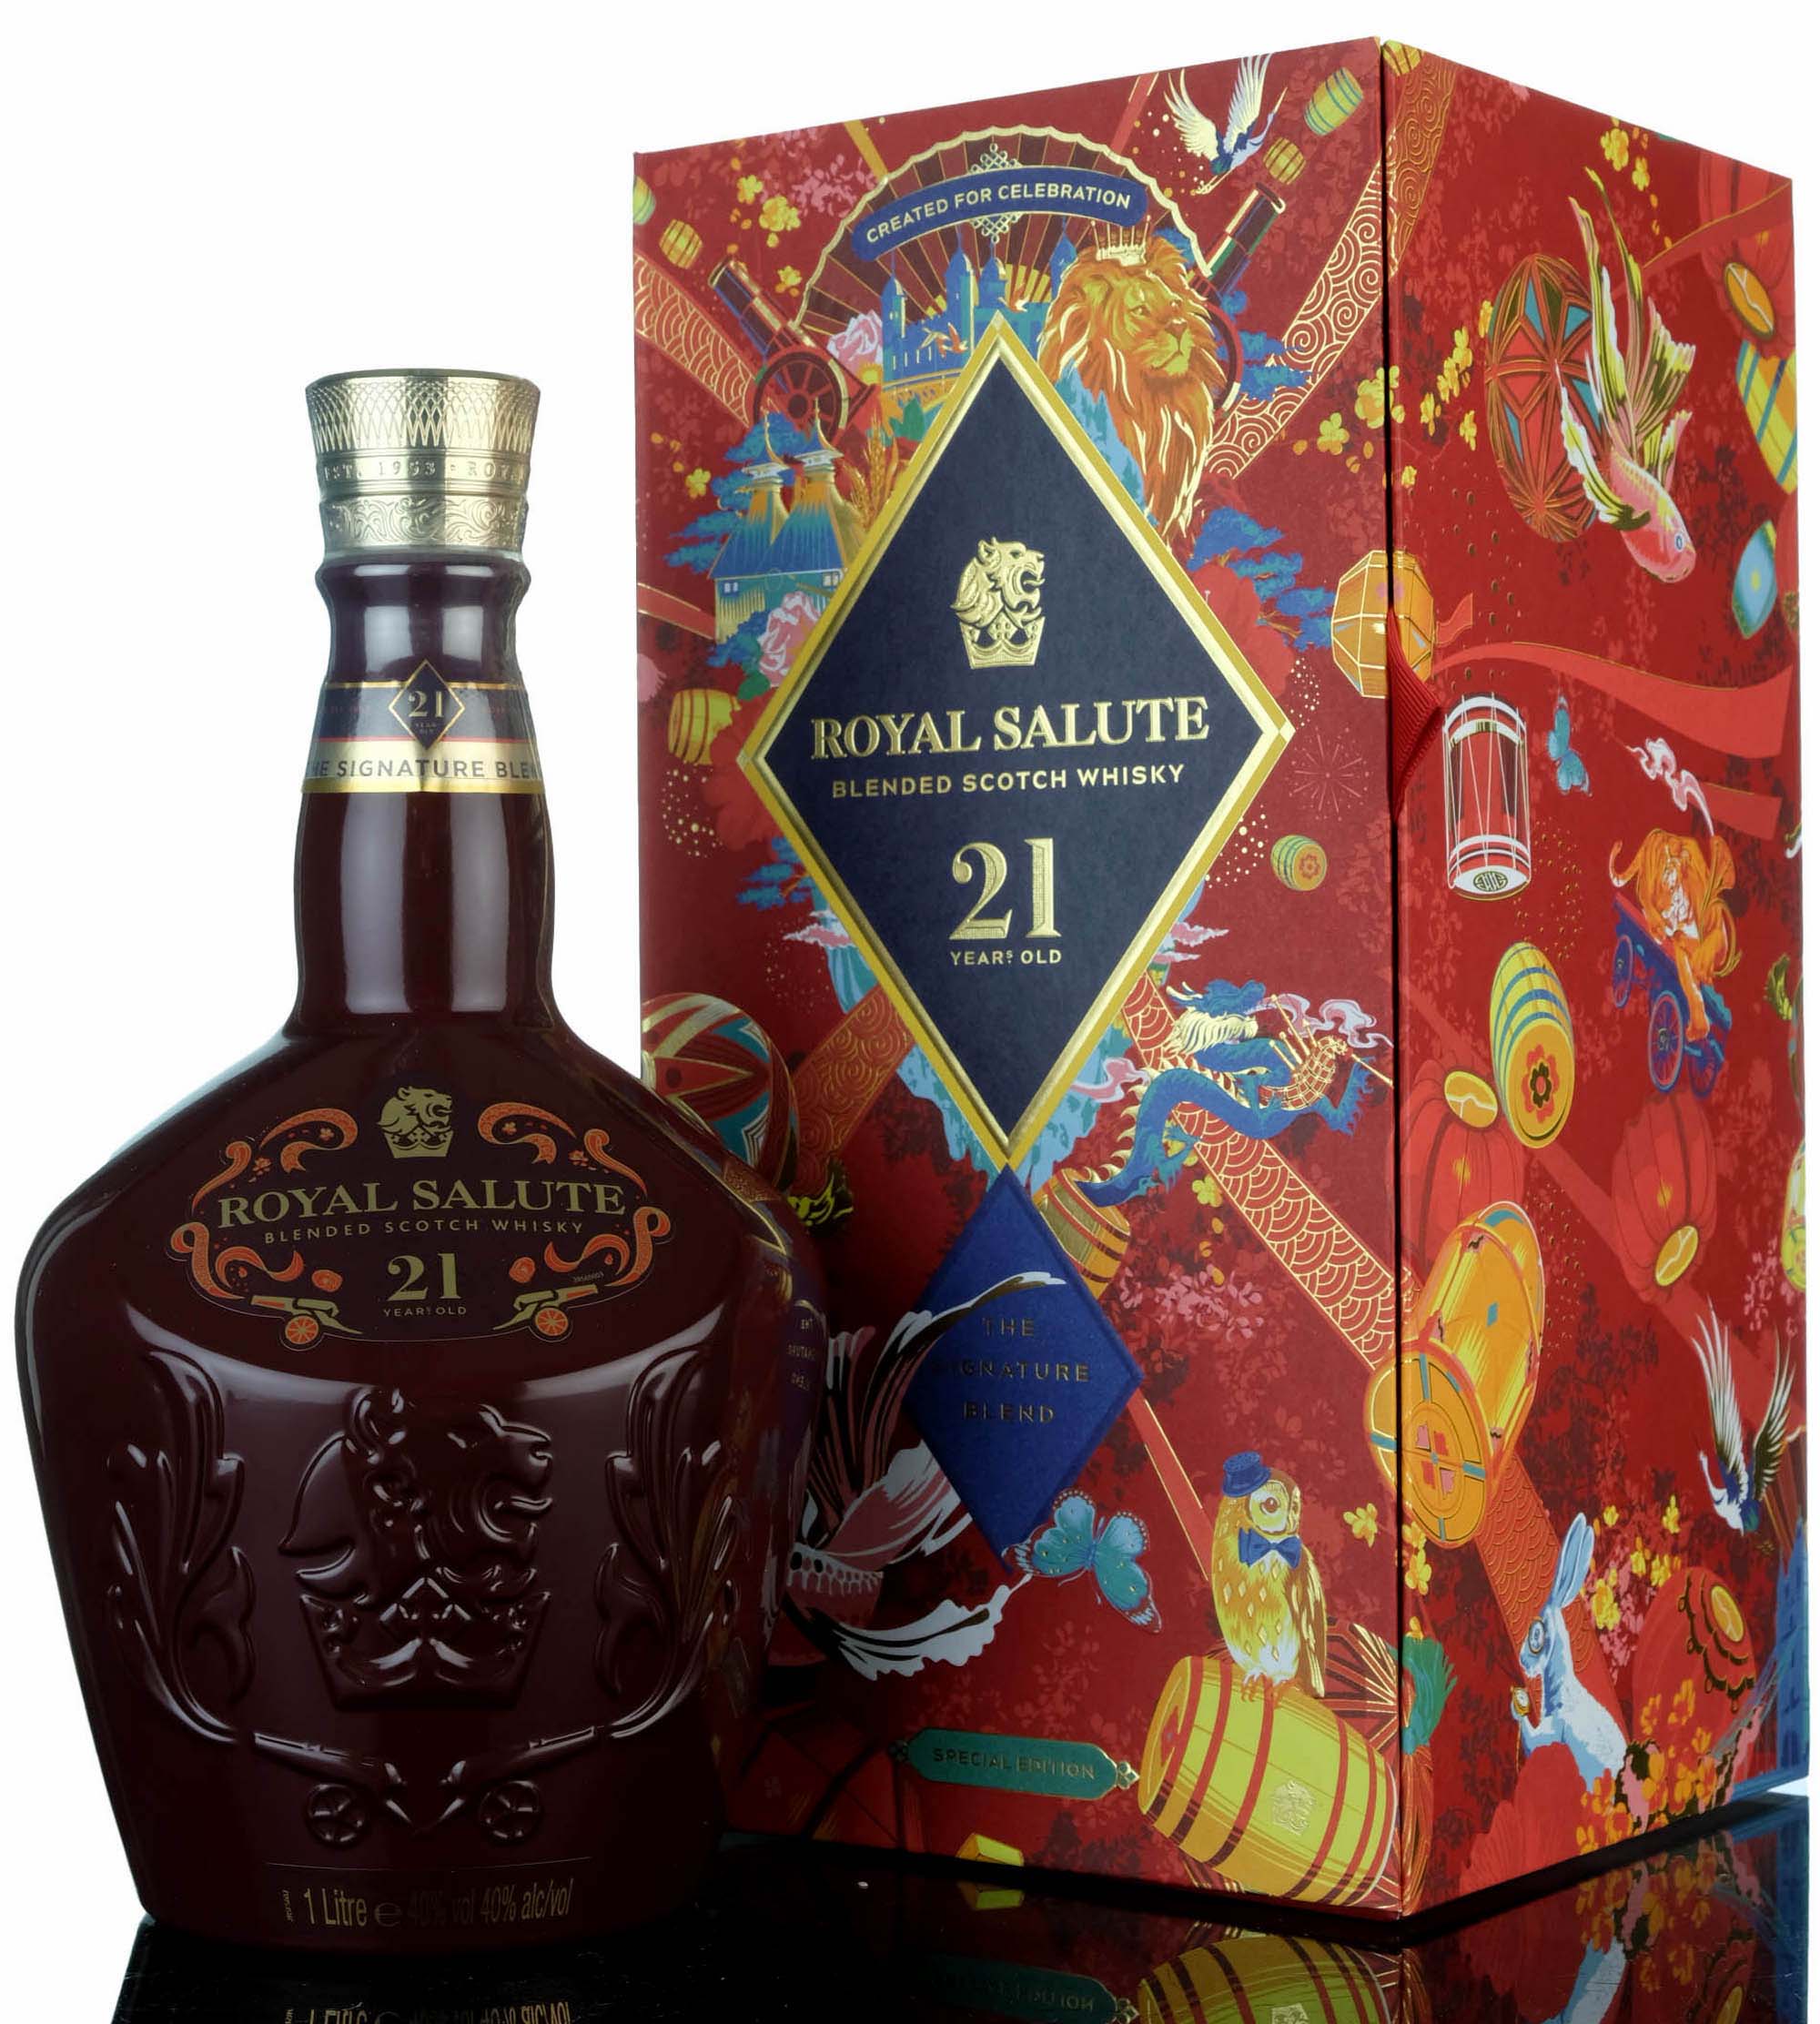 Royal Salute 21 Year Old - The Signature Blend - Special Edition - Ruby Ceramic - 2022 Rel